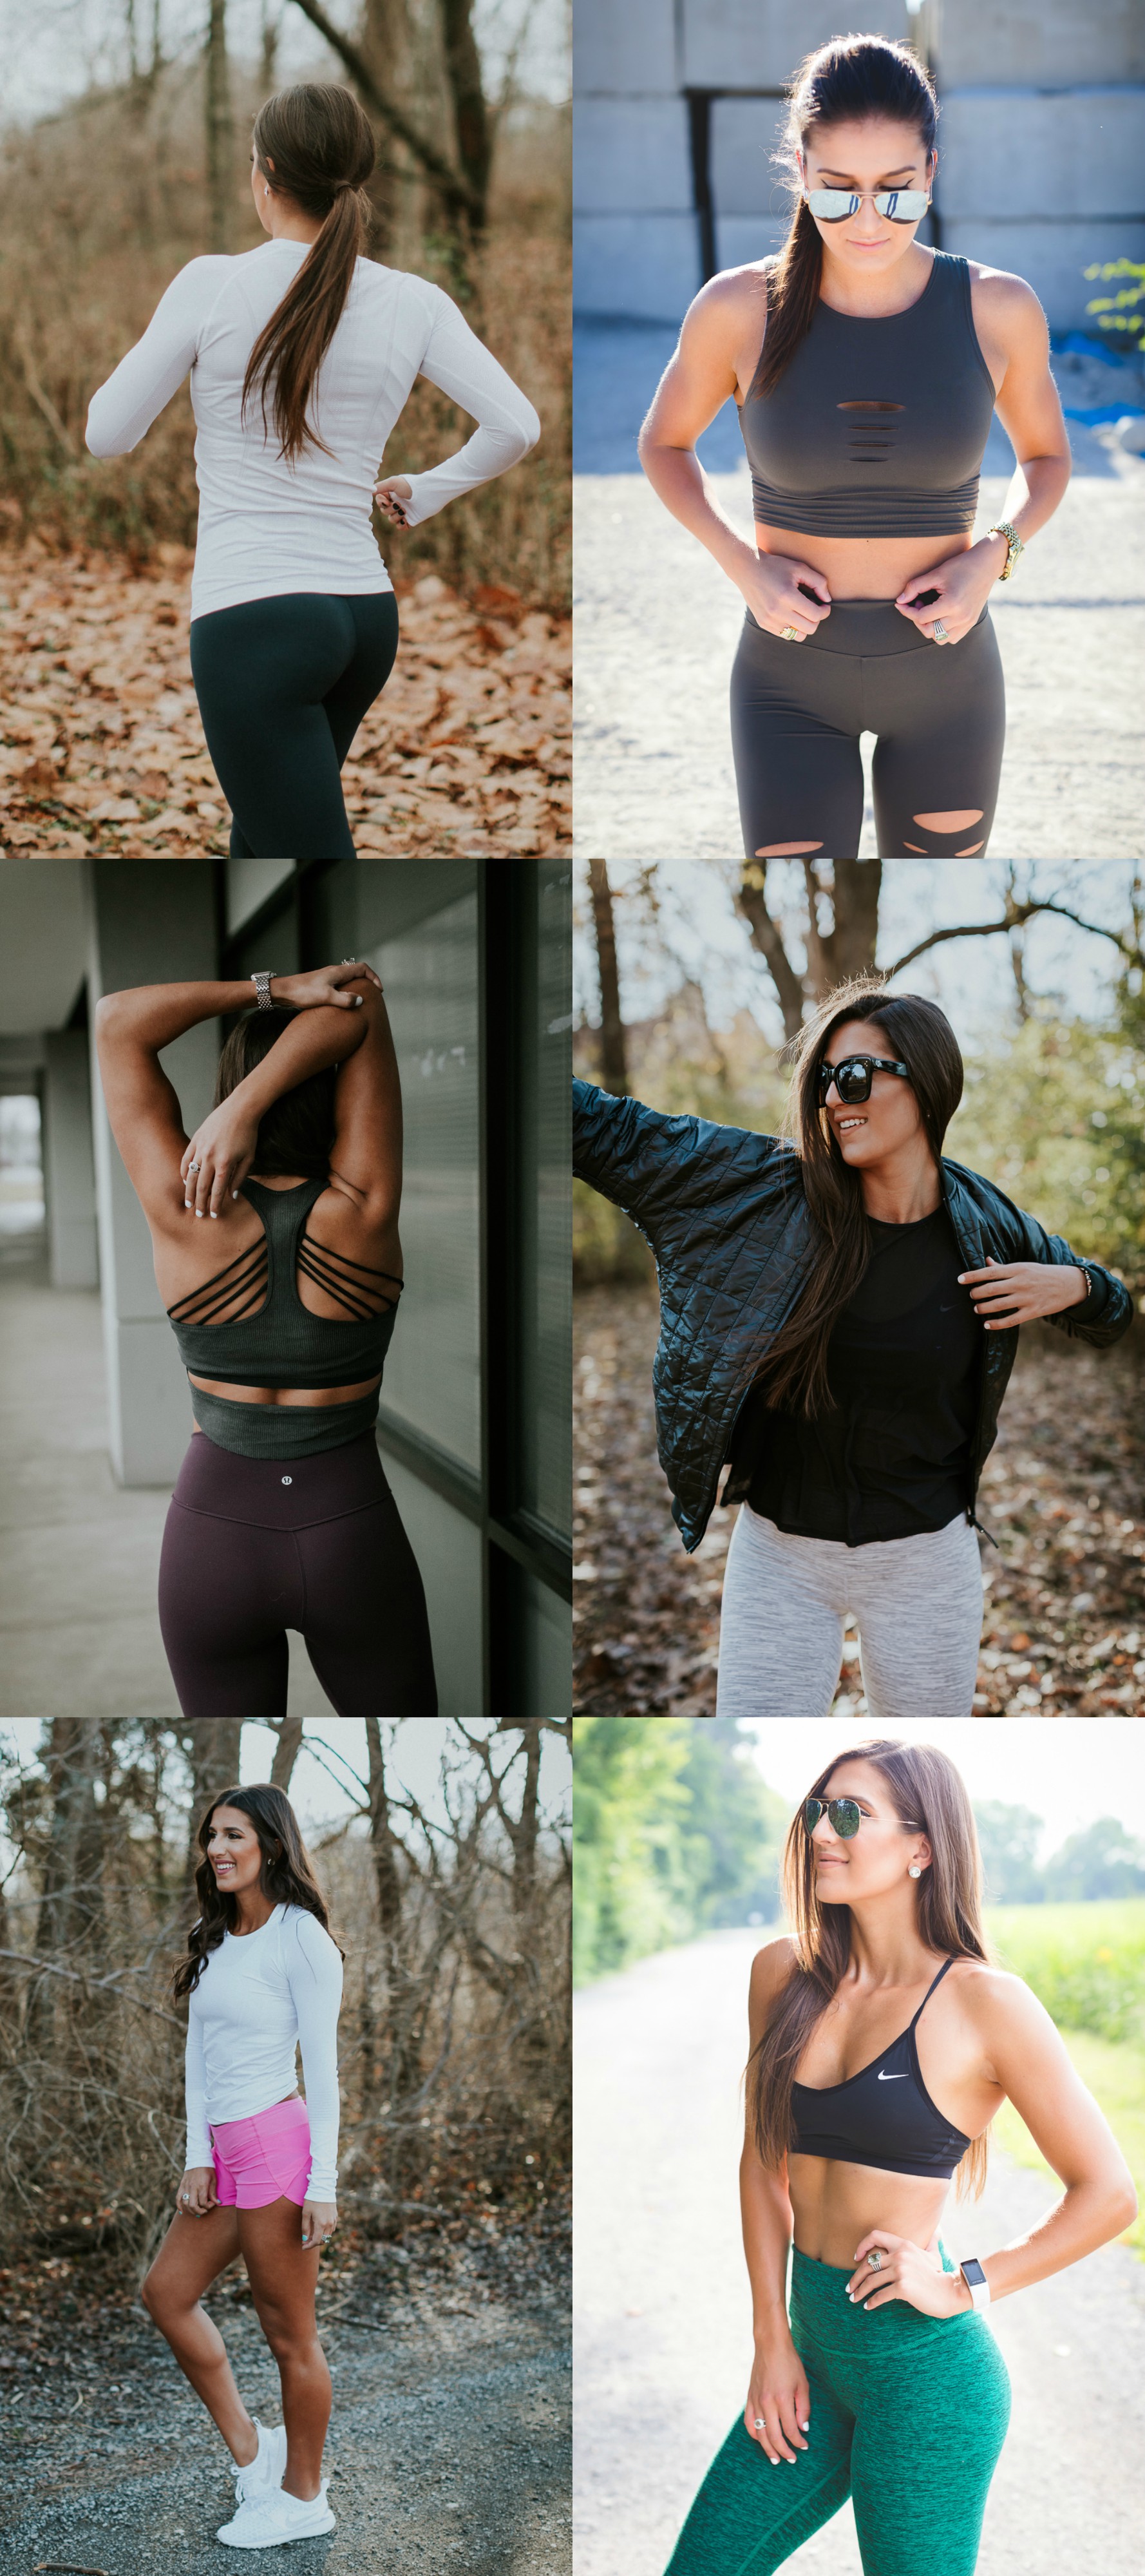 a southern drawl weekly workout routine, a southern drawl nutrition faq, grace wainwright diet, grace wainwright nutrition, athleisure outfit, a southern drawl workouts, winter activewear, winter activewear, lululemon outfit, lululemon activewear, athleisure, cute activewear outfit, a southern drawl workouts, weekly workout routine, weekly workouts, weekly exercises, polar a360 watch, cute activewear, cute workout outfit, running routine, girl gains, fitness inspiration, fitspo, athleisure, nike athleisure outfit // grace wainwright a southern drawl